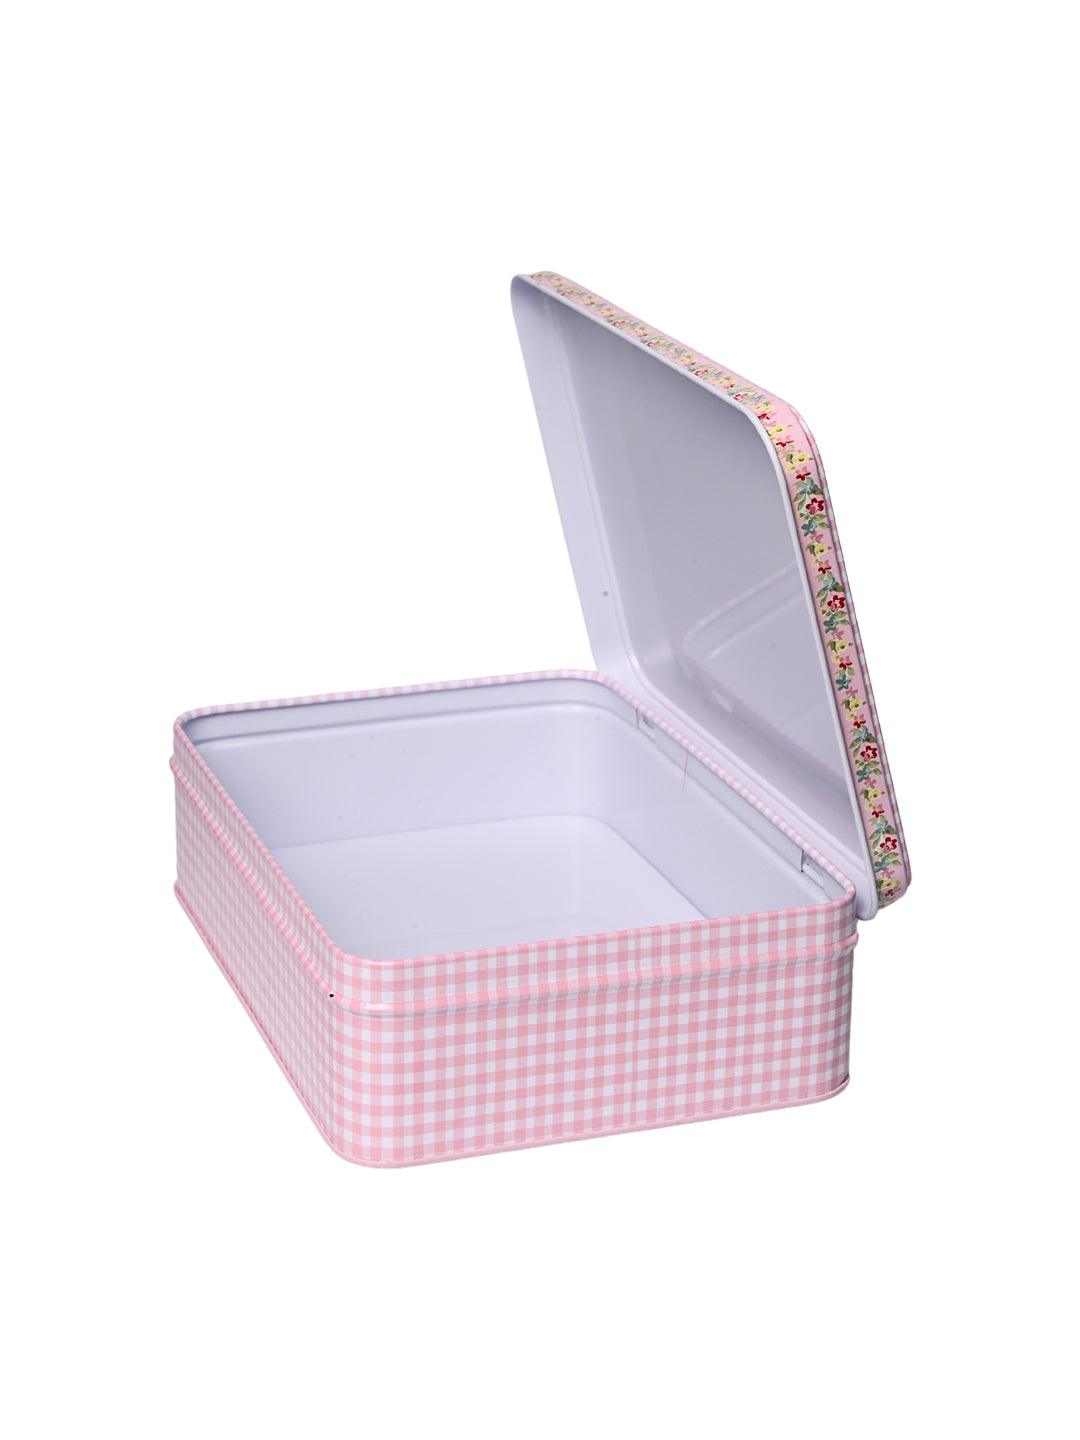 Floral Tin Storage Box Container - Set Of 6, Pink & White - MARKET99